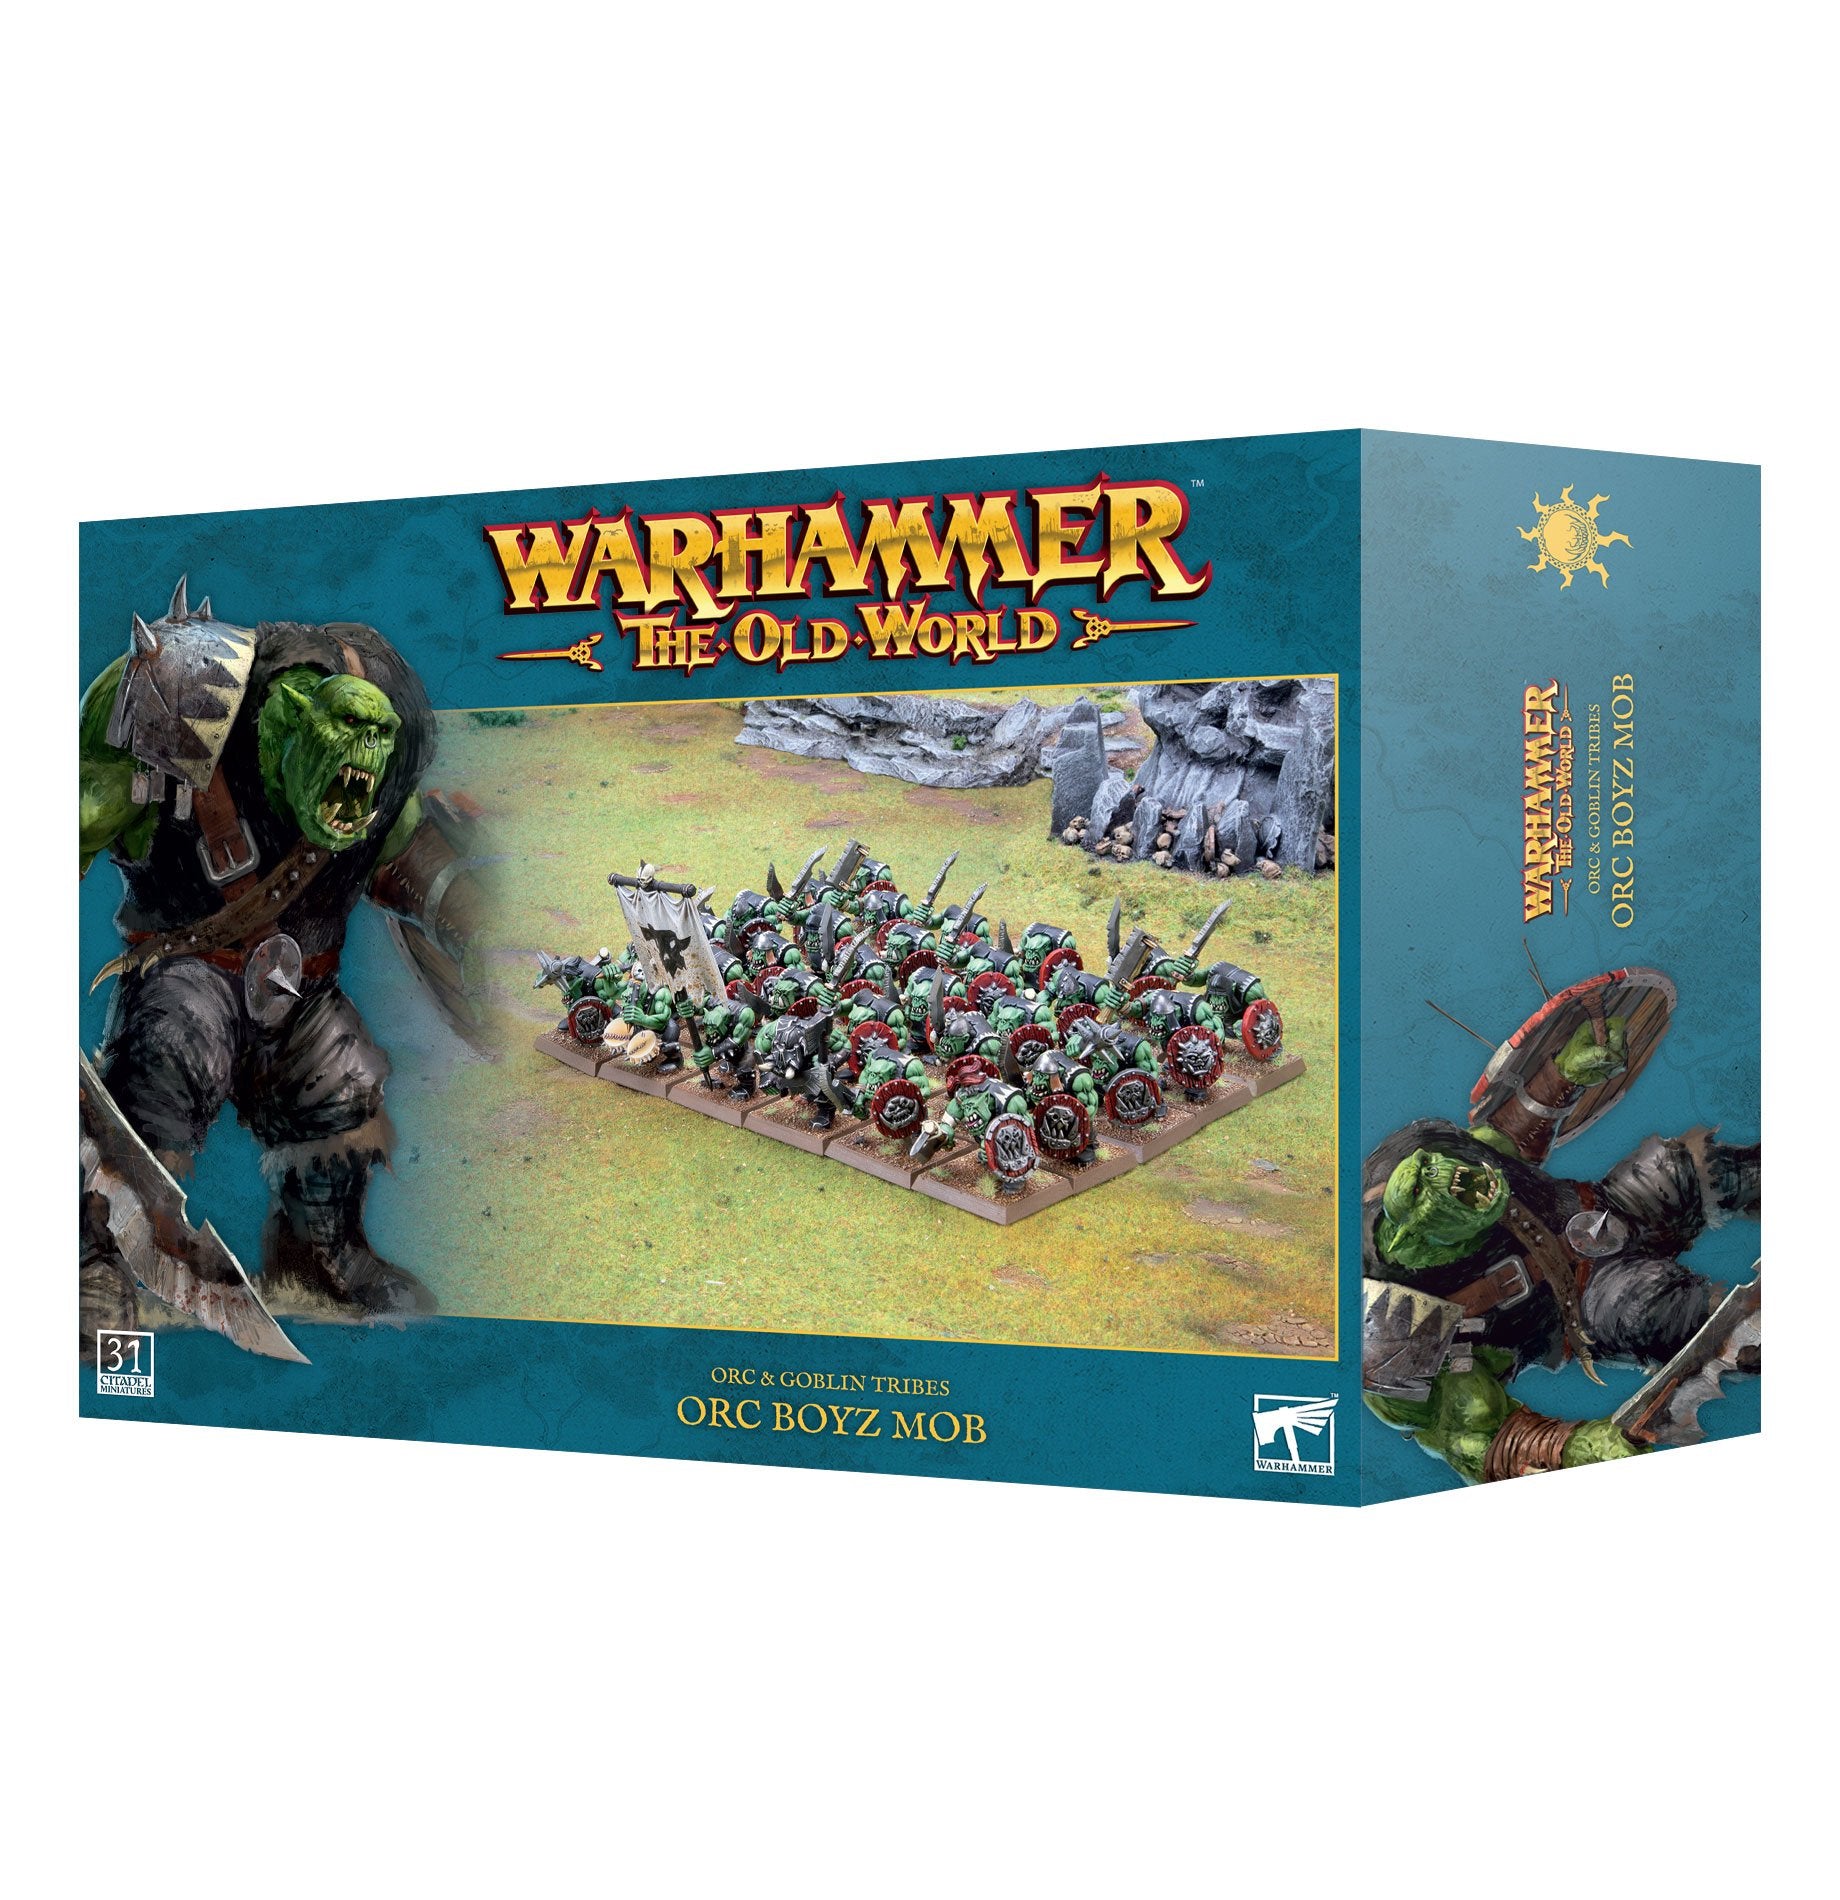 Warhammer The Old World: Orc & Goblin Tribes Orc Boyz Mob